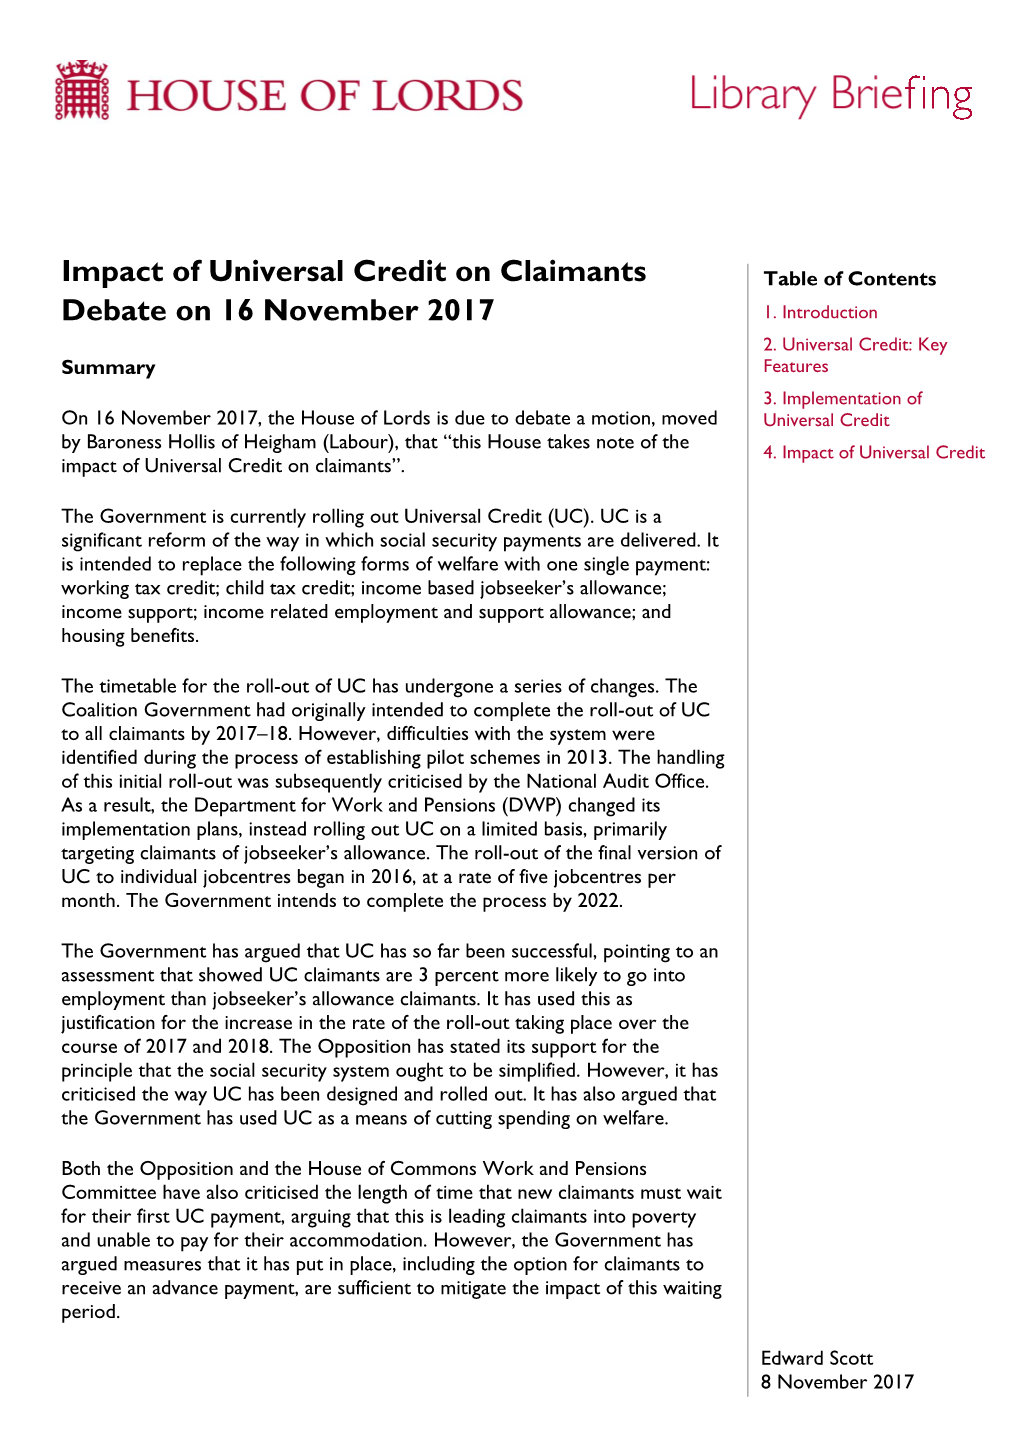 Impact of Universal Credit on Claimants Table of Contents Debate on 16 November 2017 1